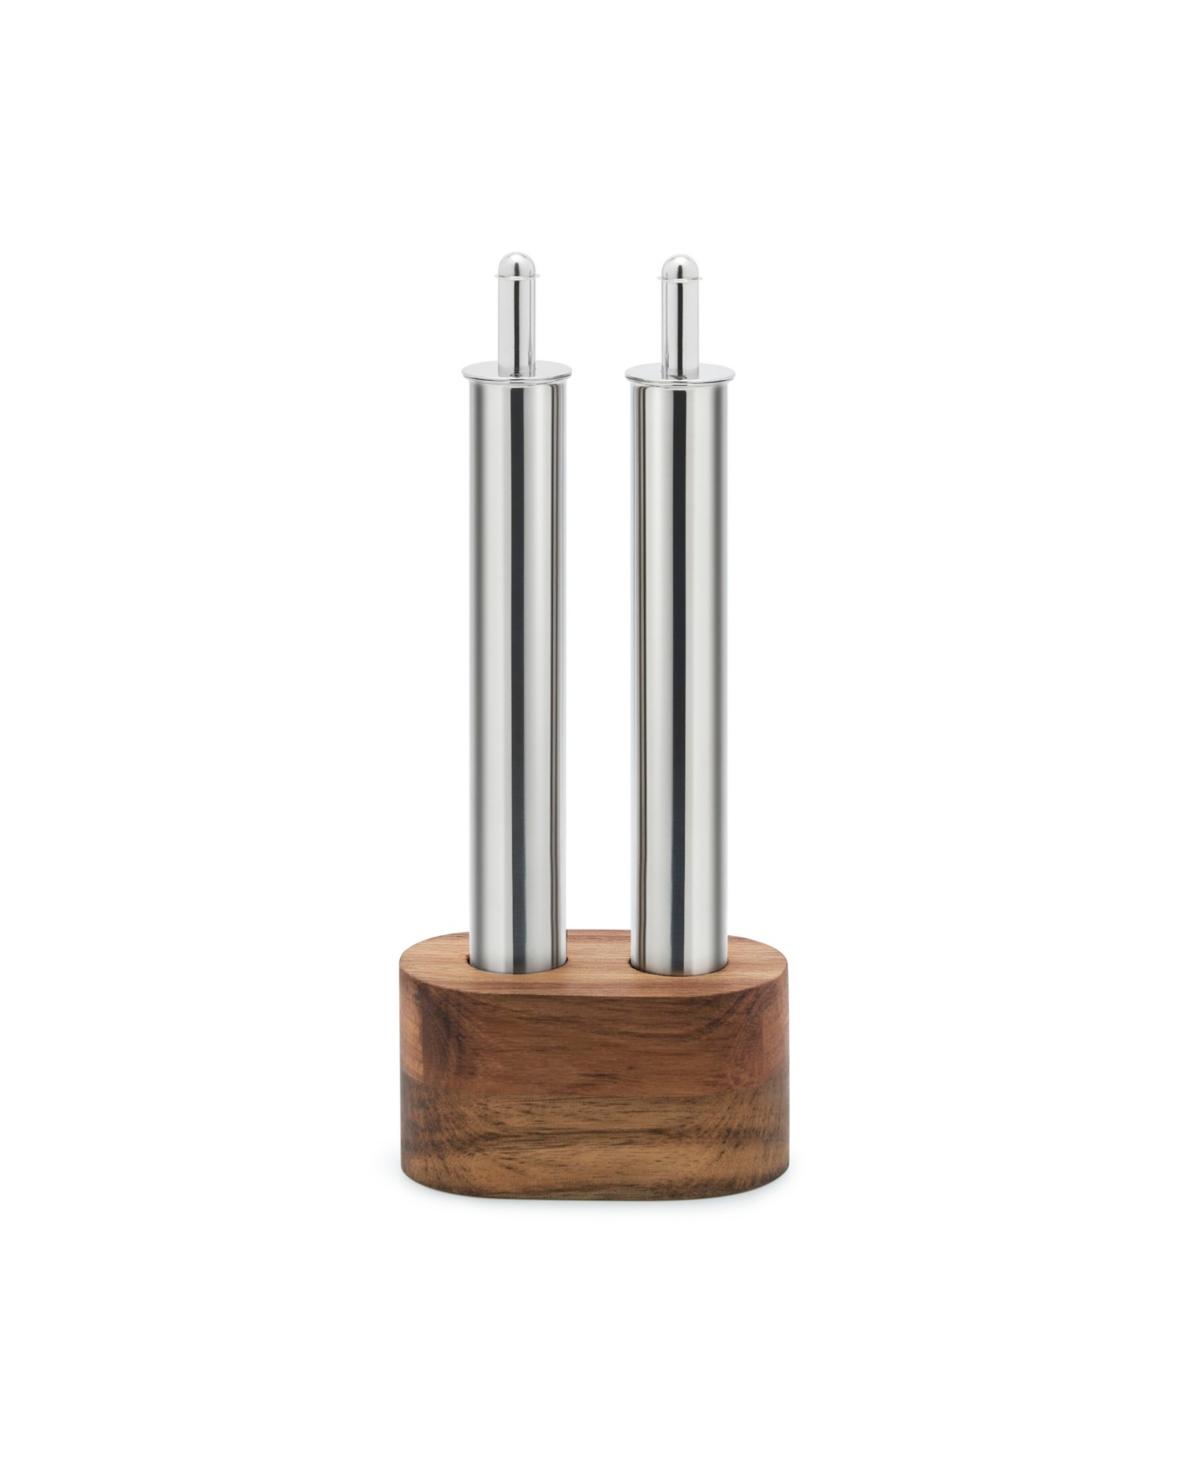 Olipac Filare Oil And Vinegar Set With Wooden Base In Silver